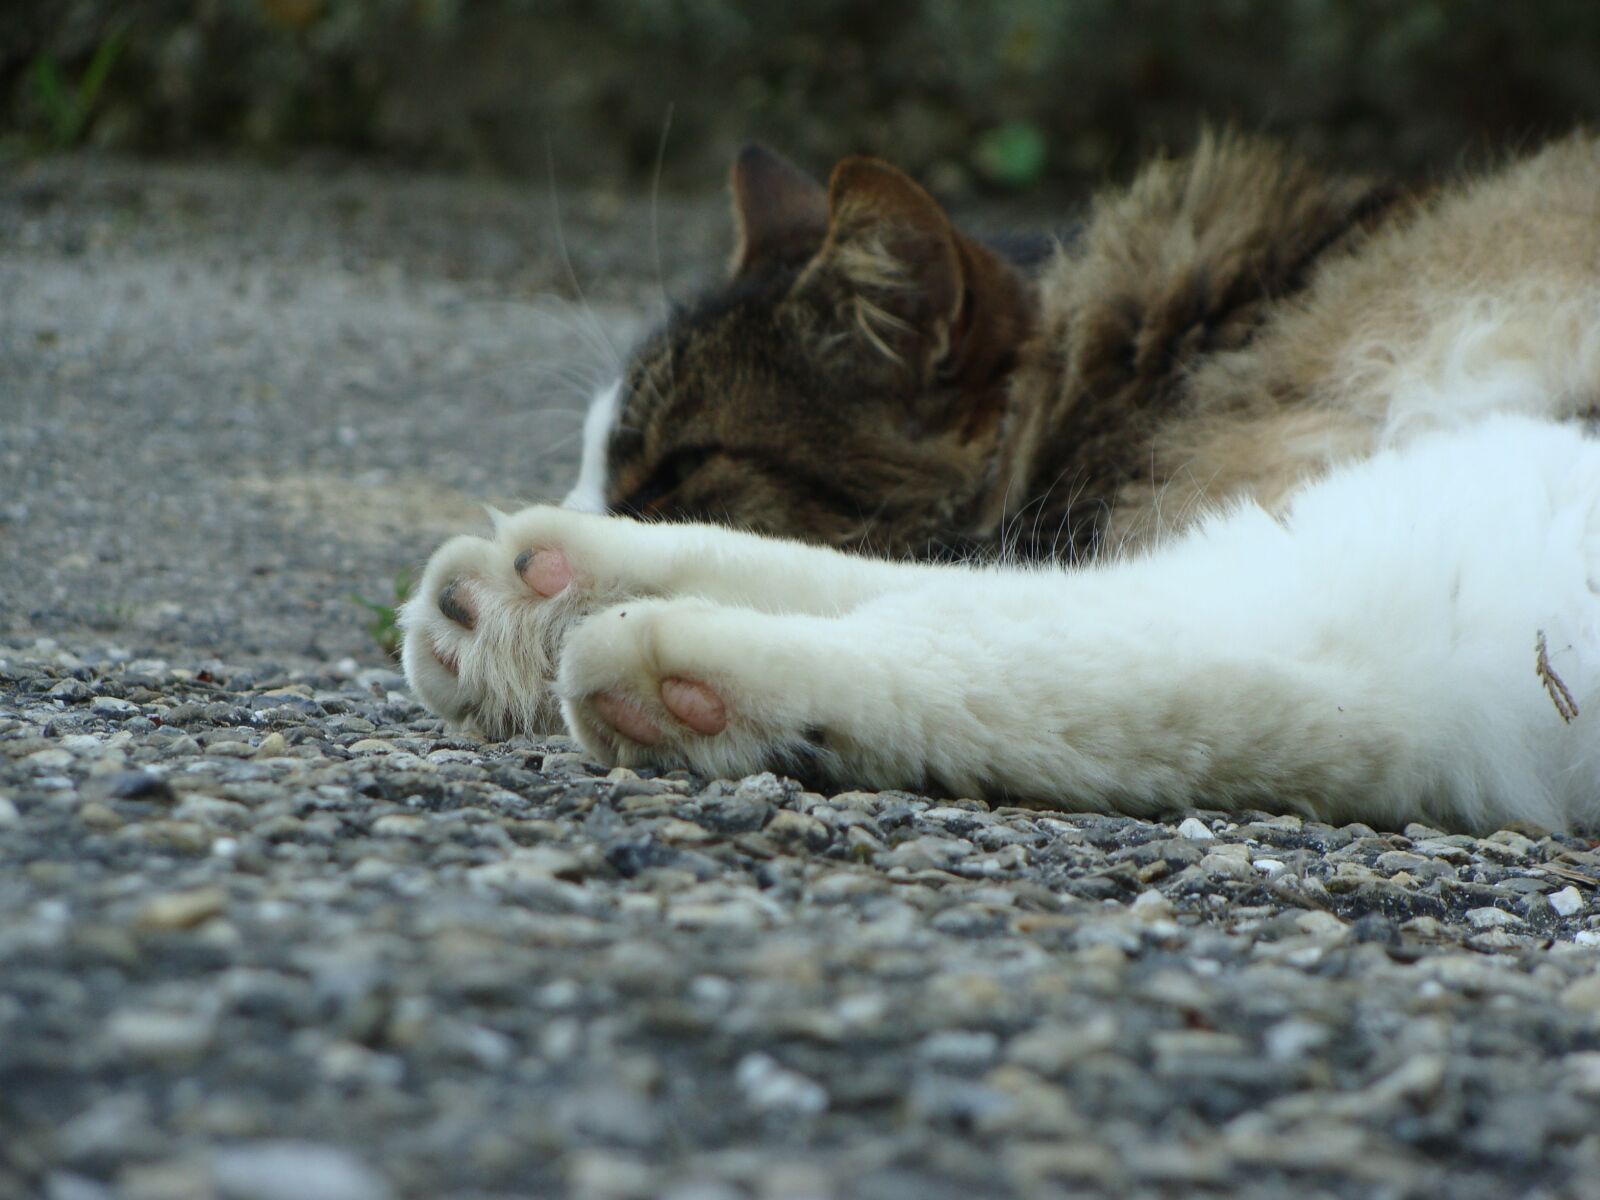 Sony Cyber-shot DSC-H10 sample photo. Cat, cat paws, animal photography